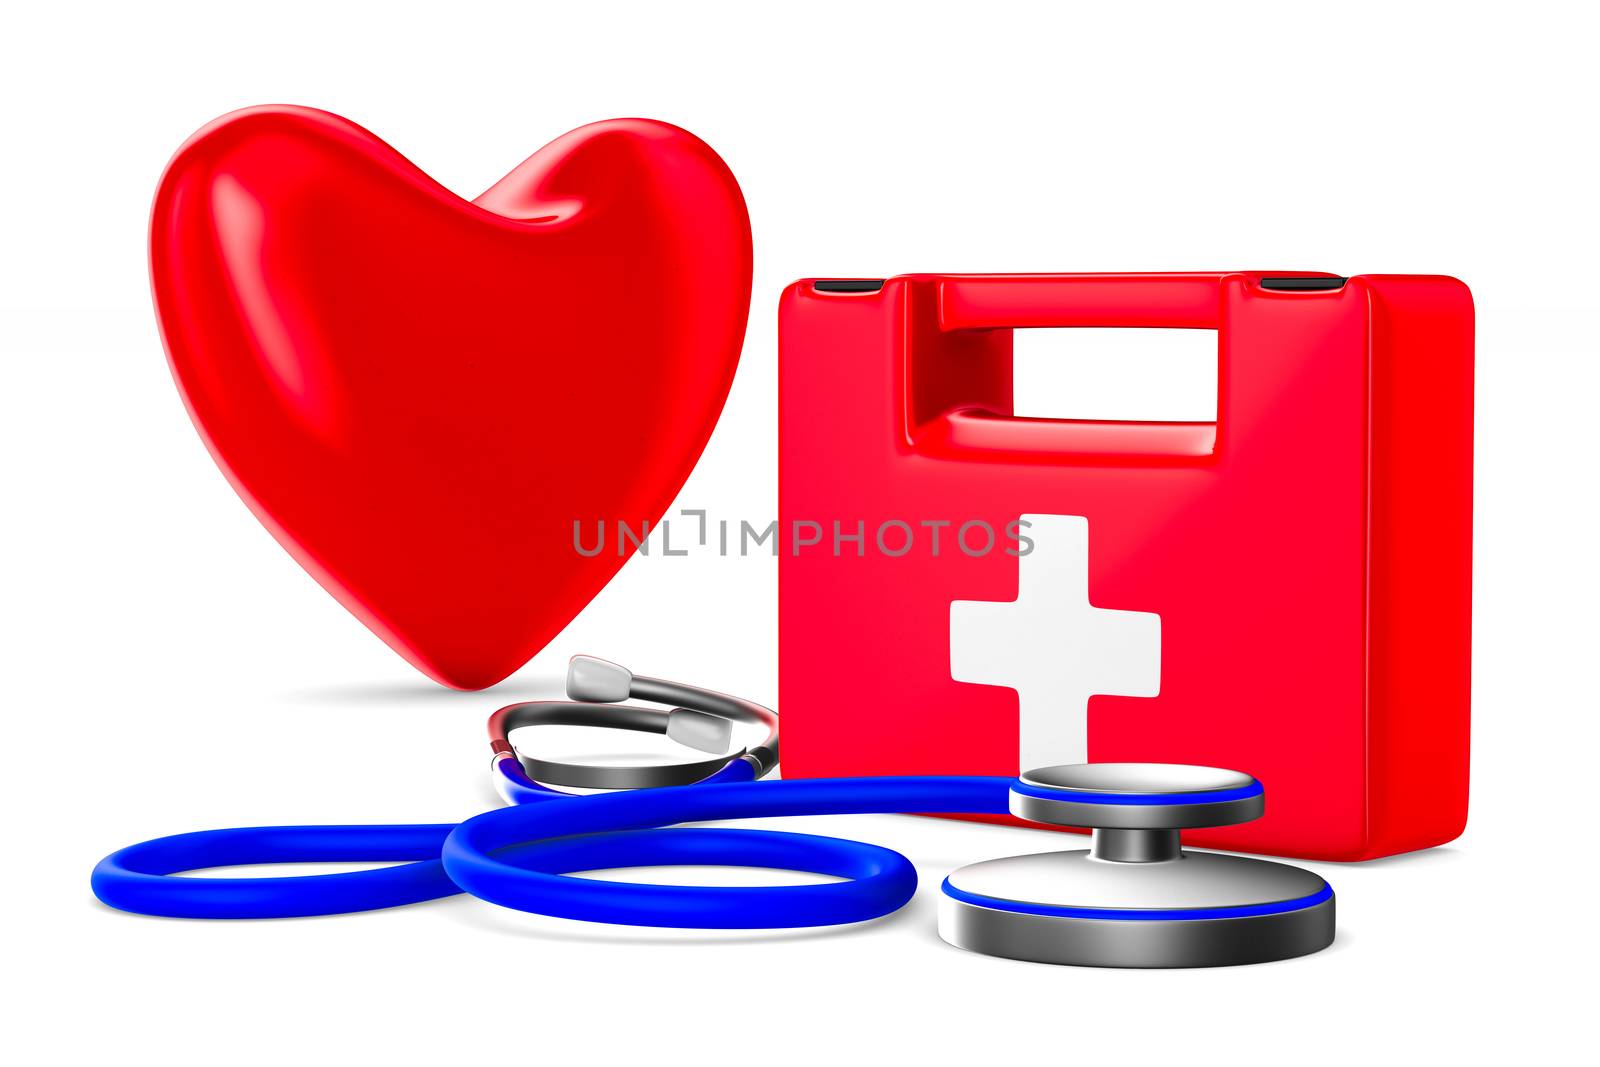 Treatment heart on white background. Isolated 3D image